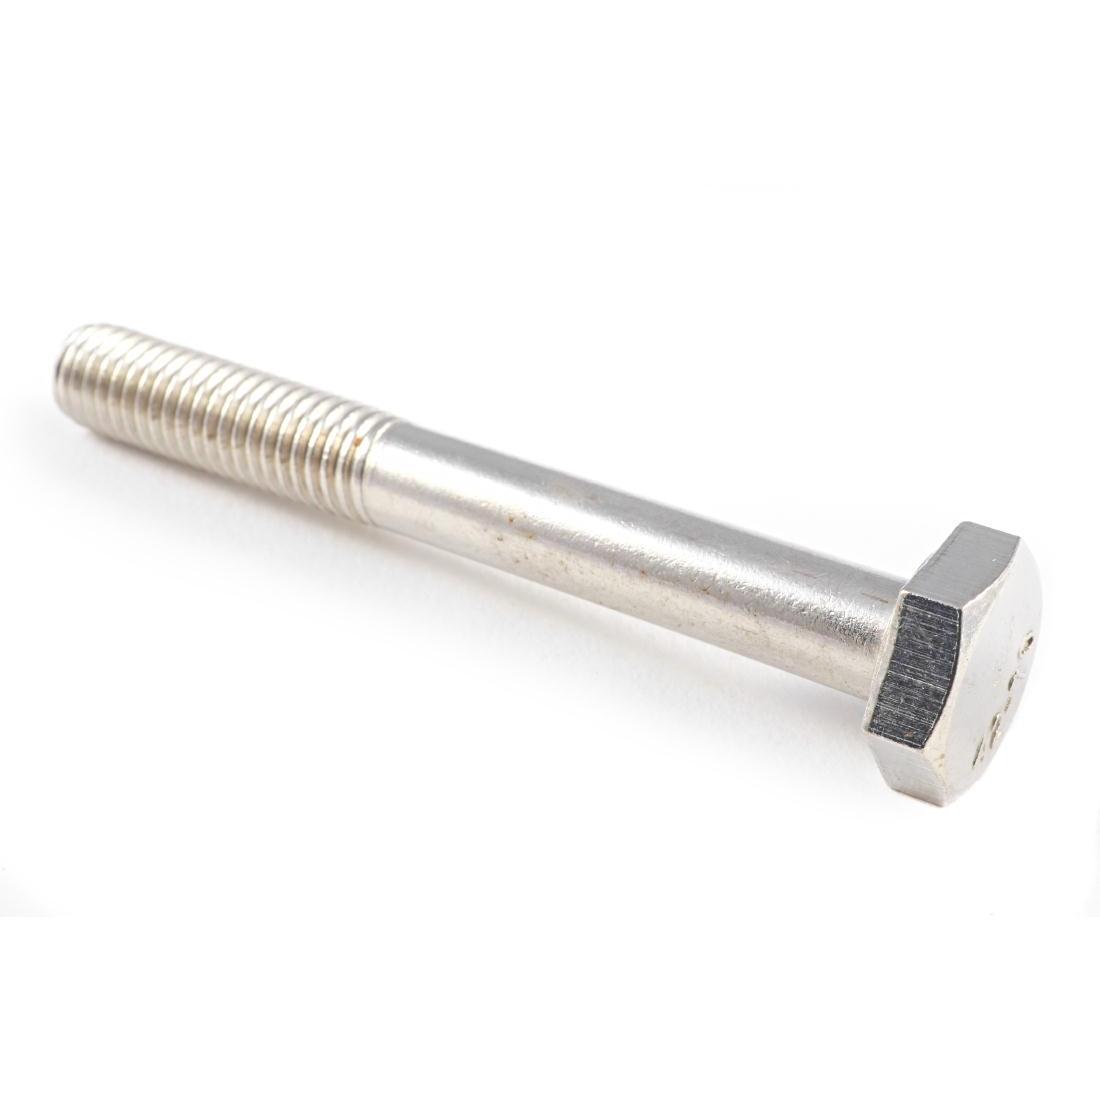 A2 Stainless Steel Bolt (M8 x 65) - AD777 - 1